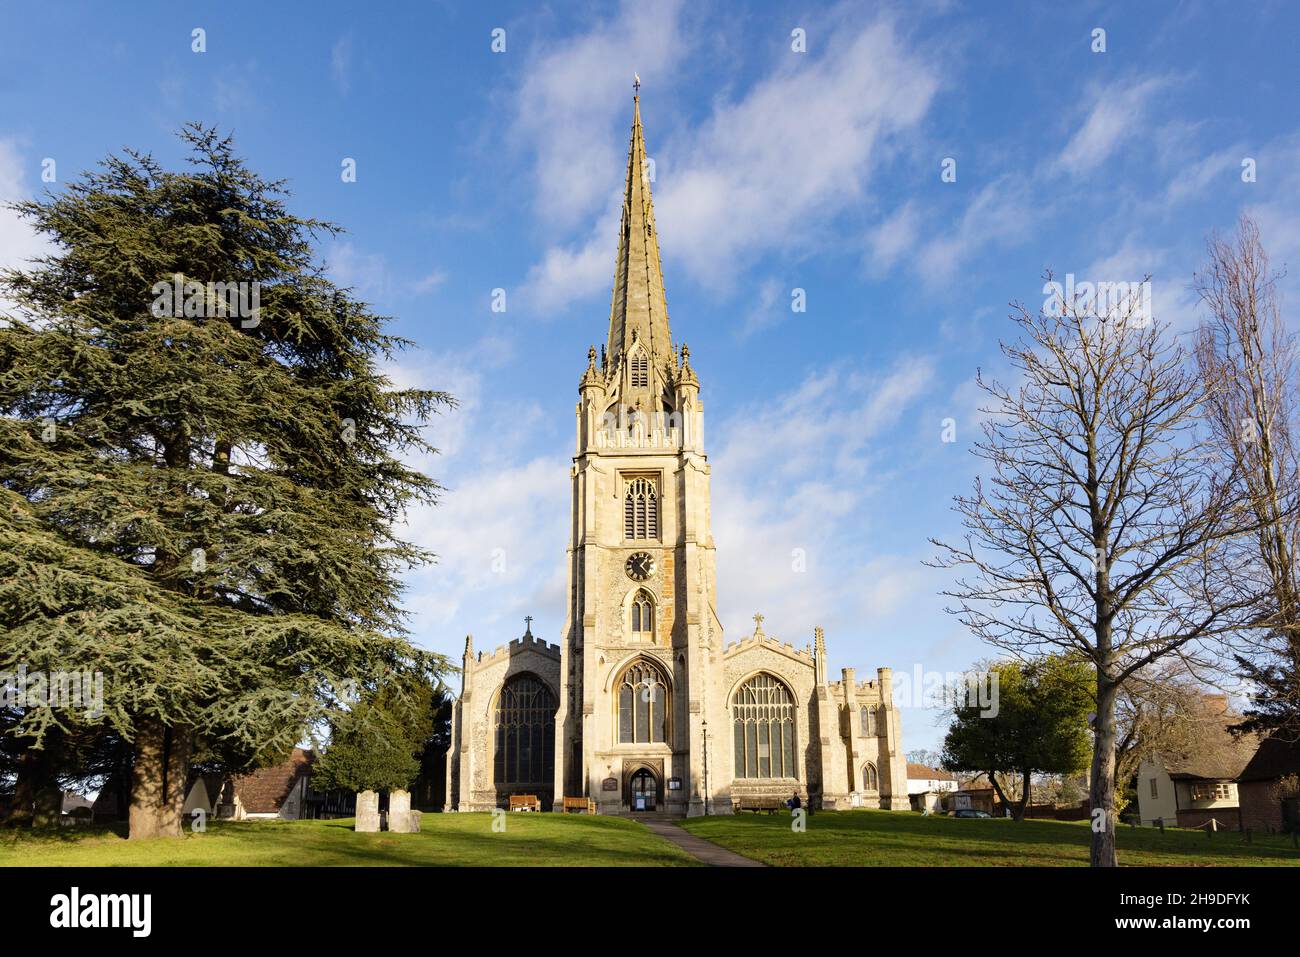 St Marys Church, Saffron Walden, Essex UK, or St Mary the Virgin Church, with spire, a parish church, originating in the 13th century. Stock Photo